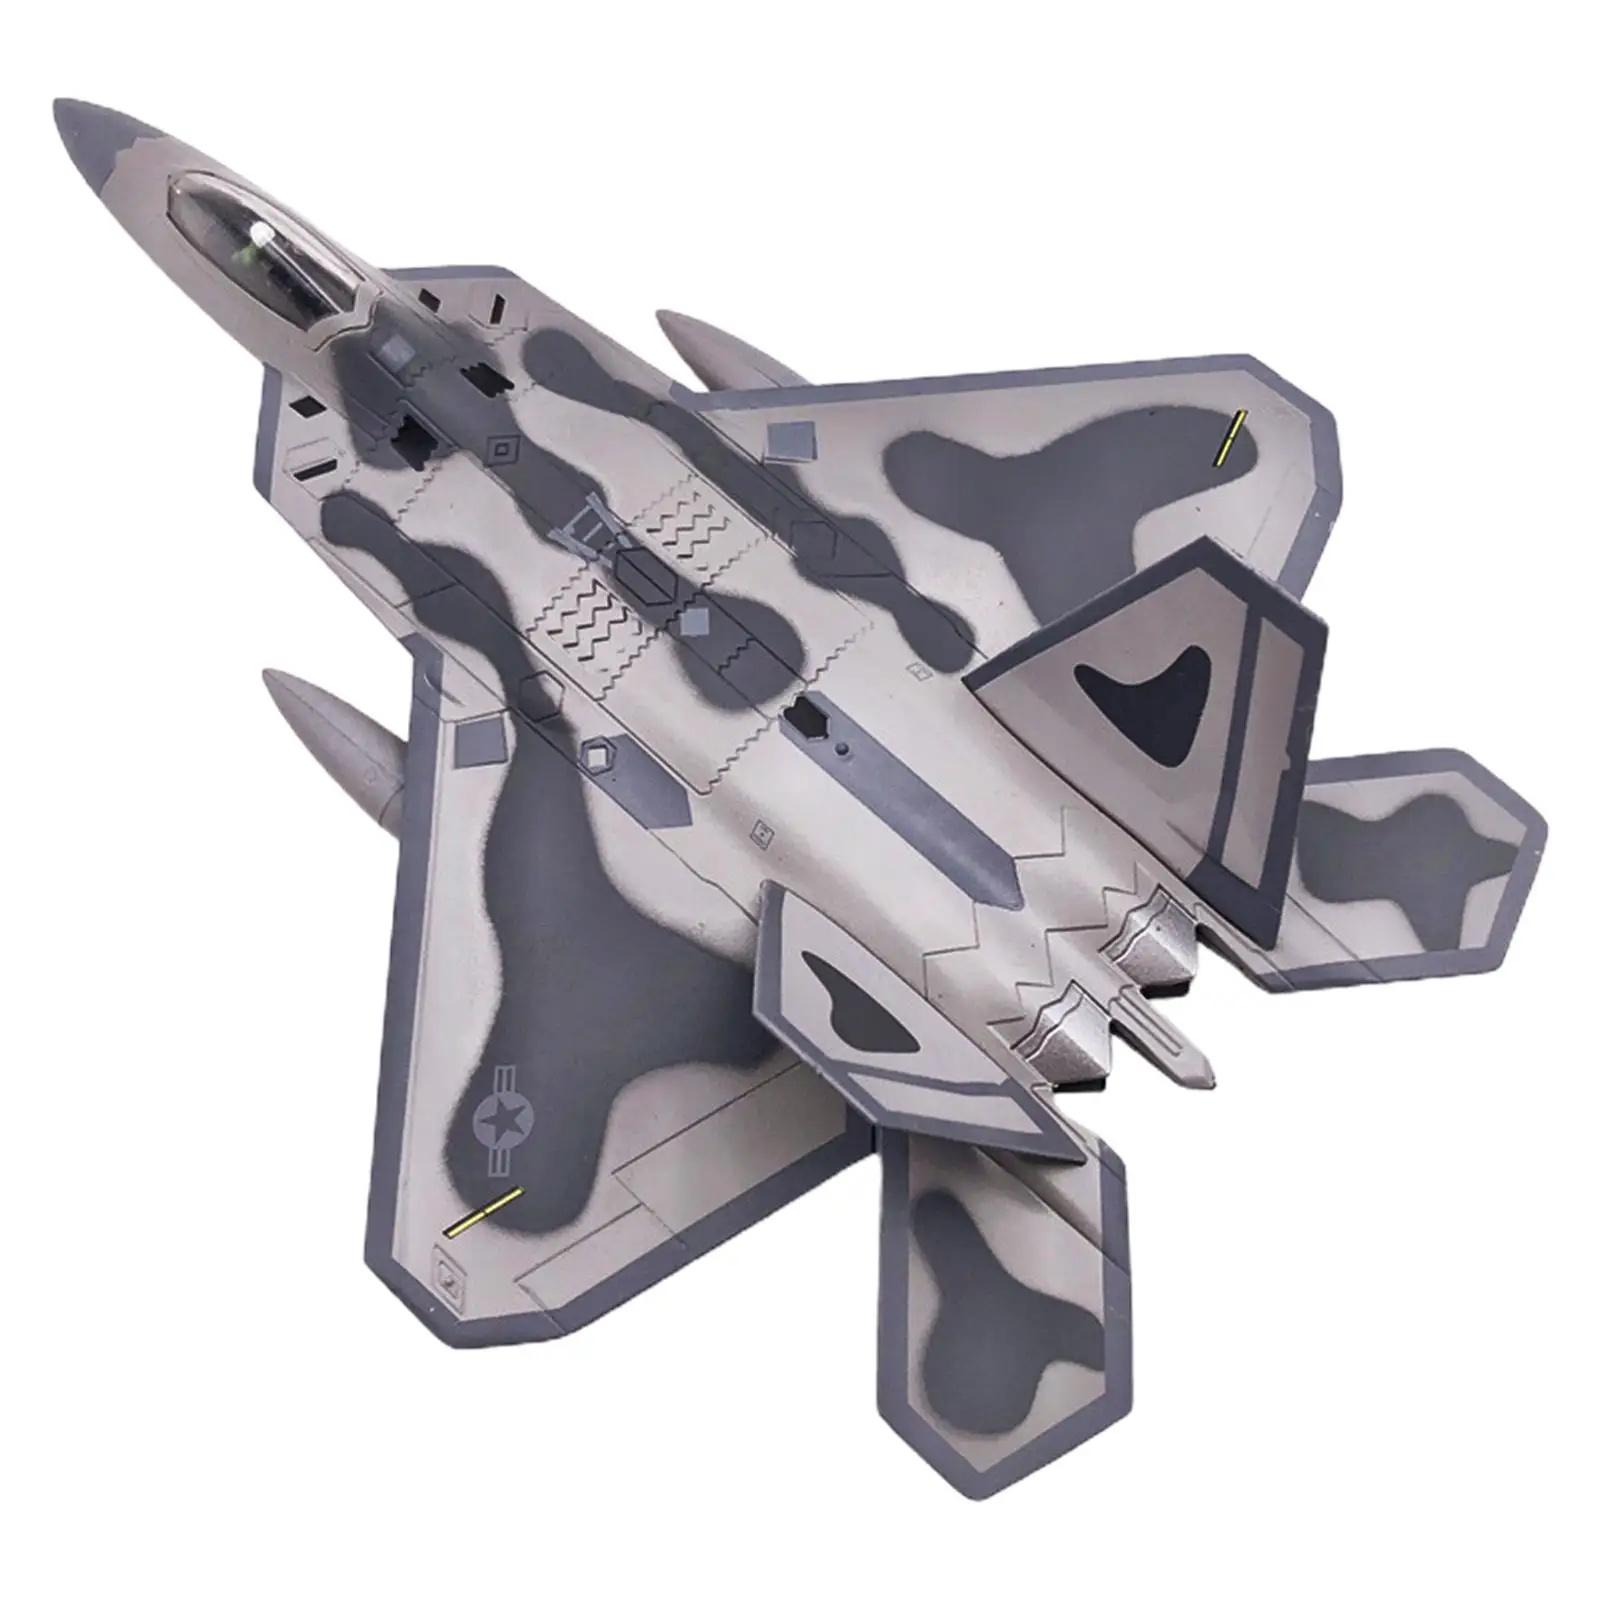 1/100 F22 Fighter Model with Stand Alloy Static Aviation Plane Gift Ornament